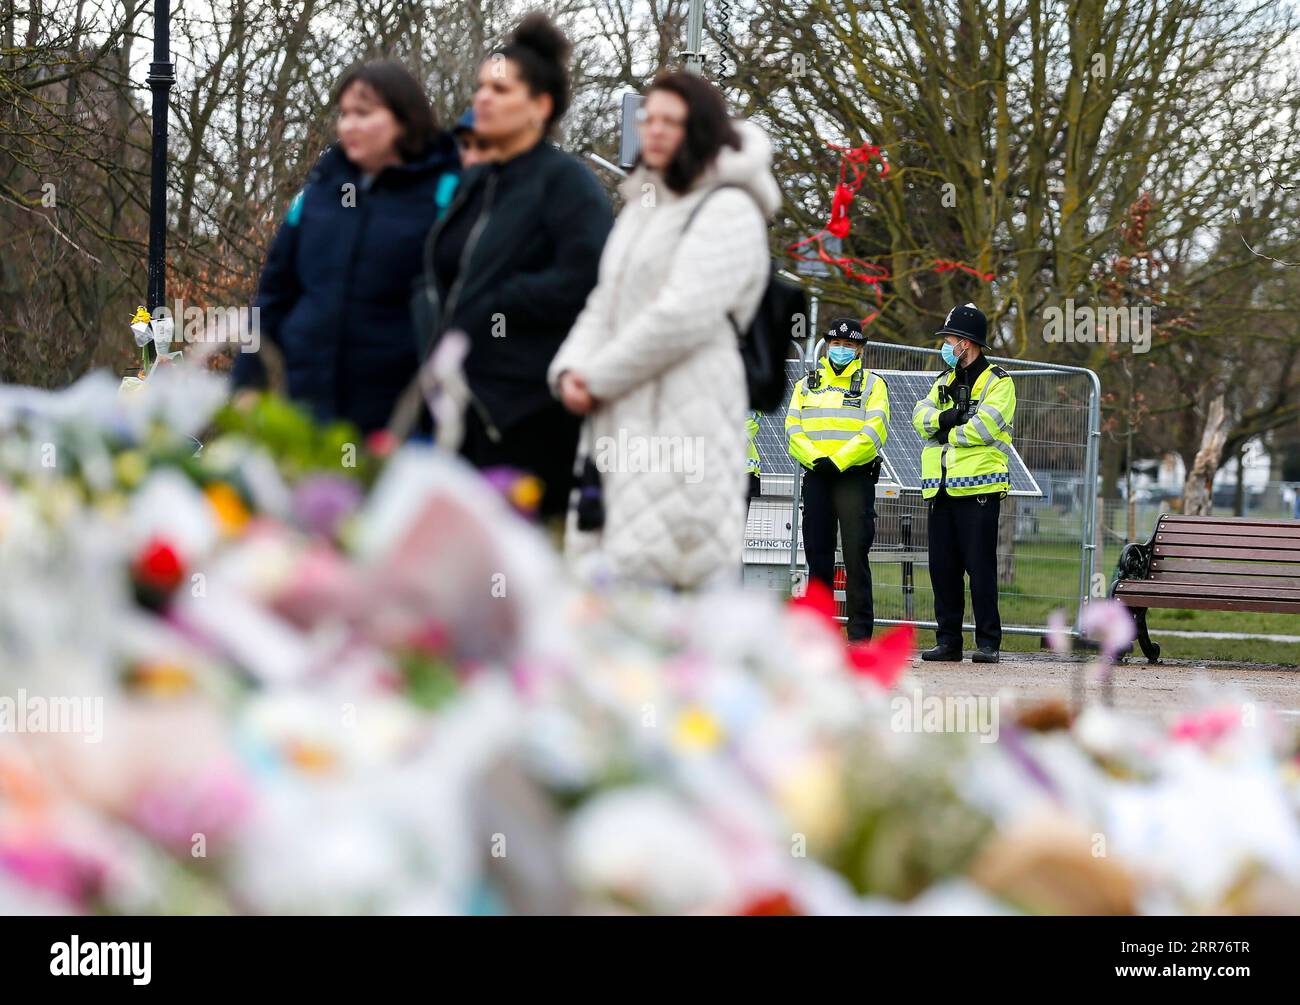 210316 -- LONDON, March 16, 2021 -- People stand next to floral tributes at the bandstand on Clapham Common to mourn for Sarah Everard while police officers stand guard in London, Britain, on March 15, 2021. A serving Metropolitan police officer on March 13 appeared in court in London after being charged with the kidnap and murder of a 33-year-old woman. Wayne Couzens, 48, was arrested after Sarah Everard, a marketing executive, went missing while walking home from a friend s apartment in south London on March 3. Everard s death has caused widespread concern in Britain about women s safety, wi Stock Photo